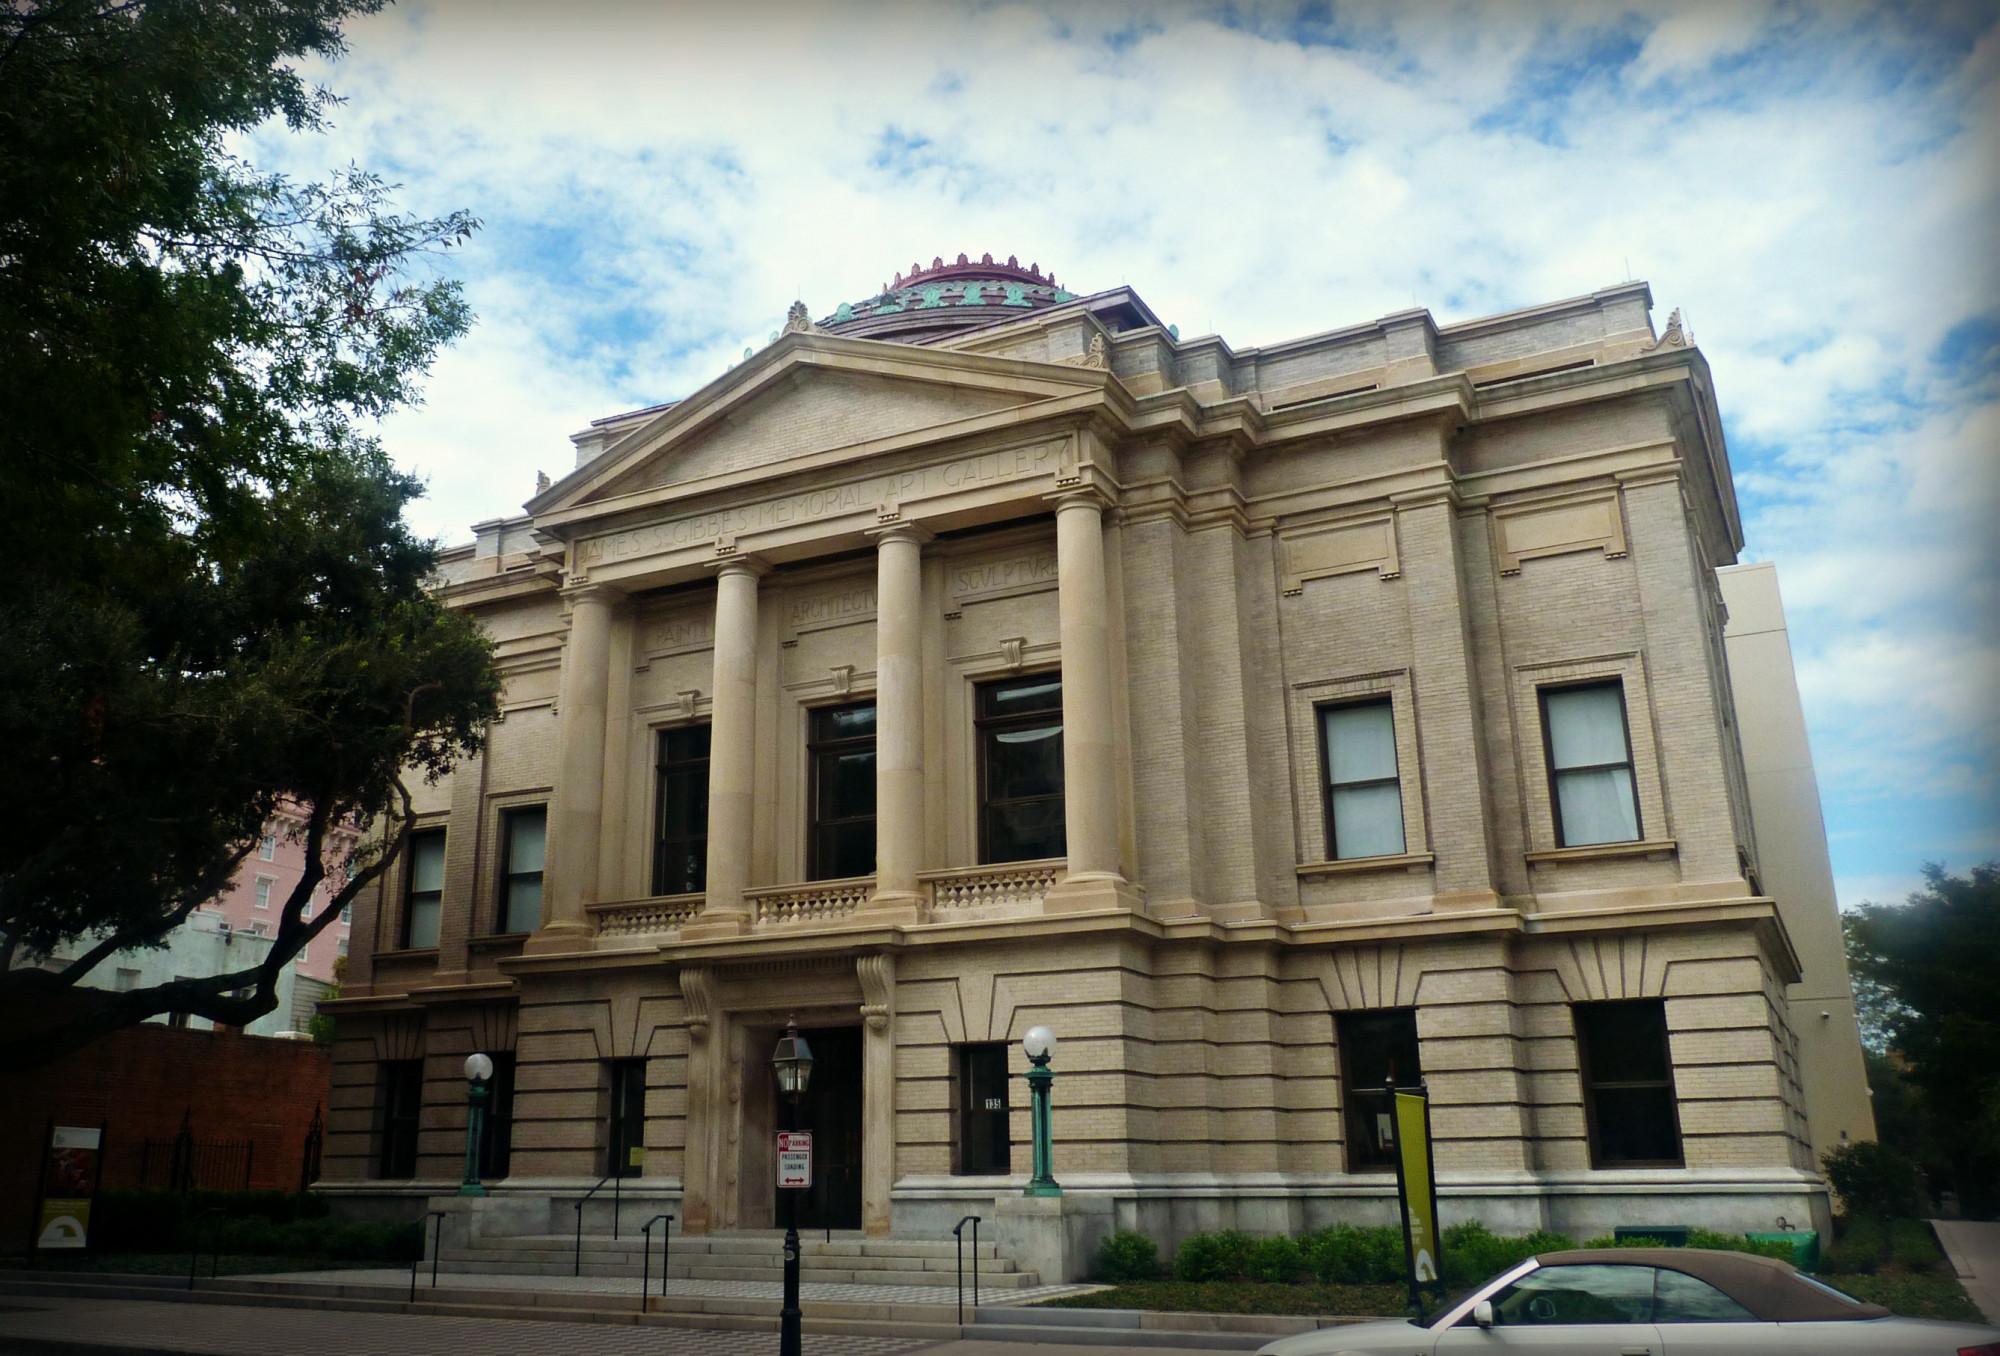 The exterior of the Gibbes Museum of Art